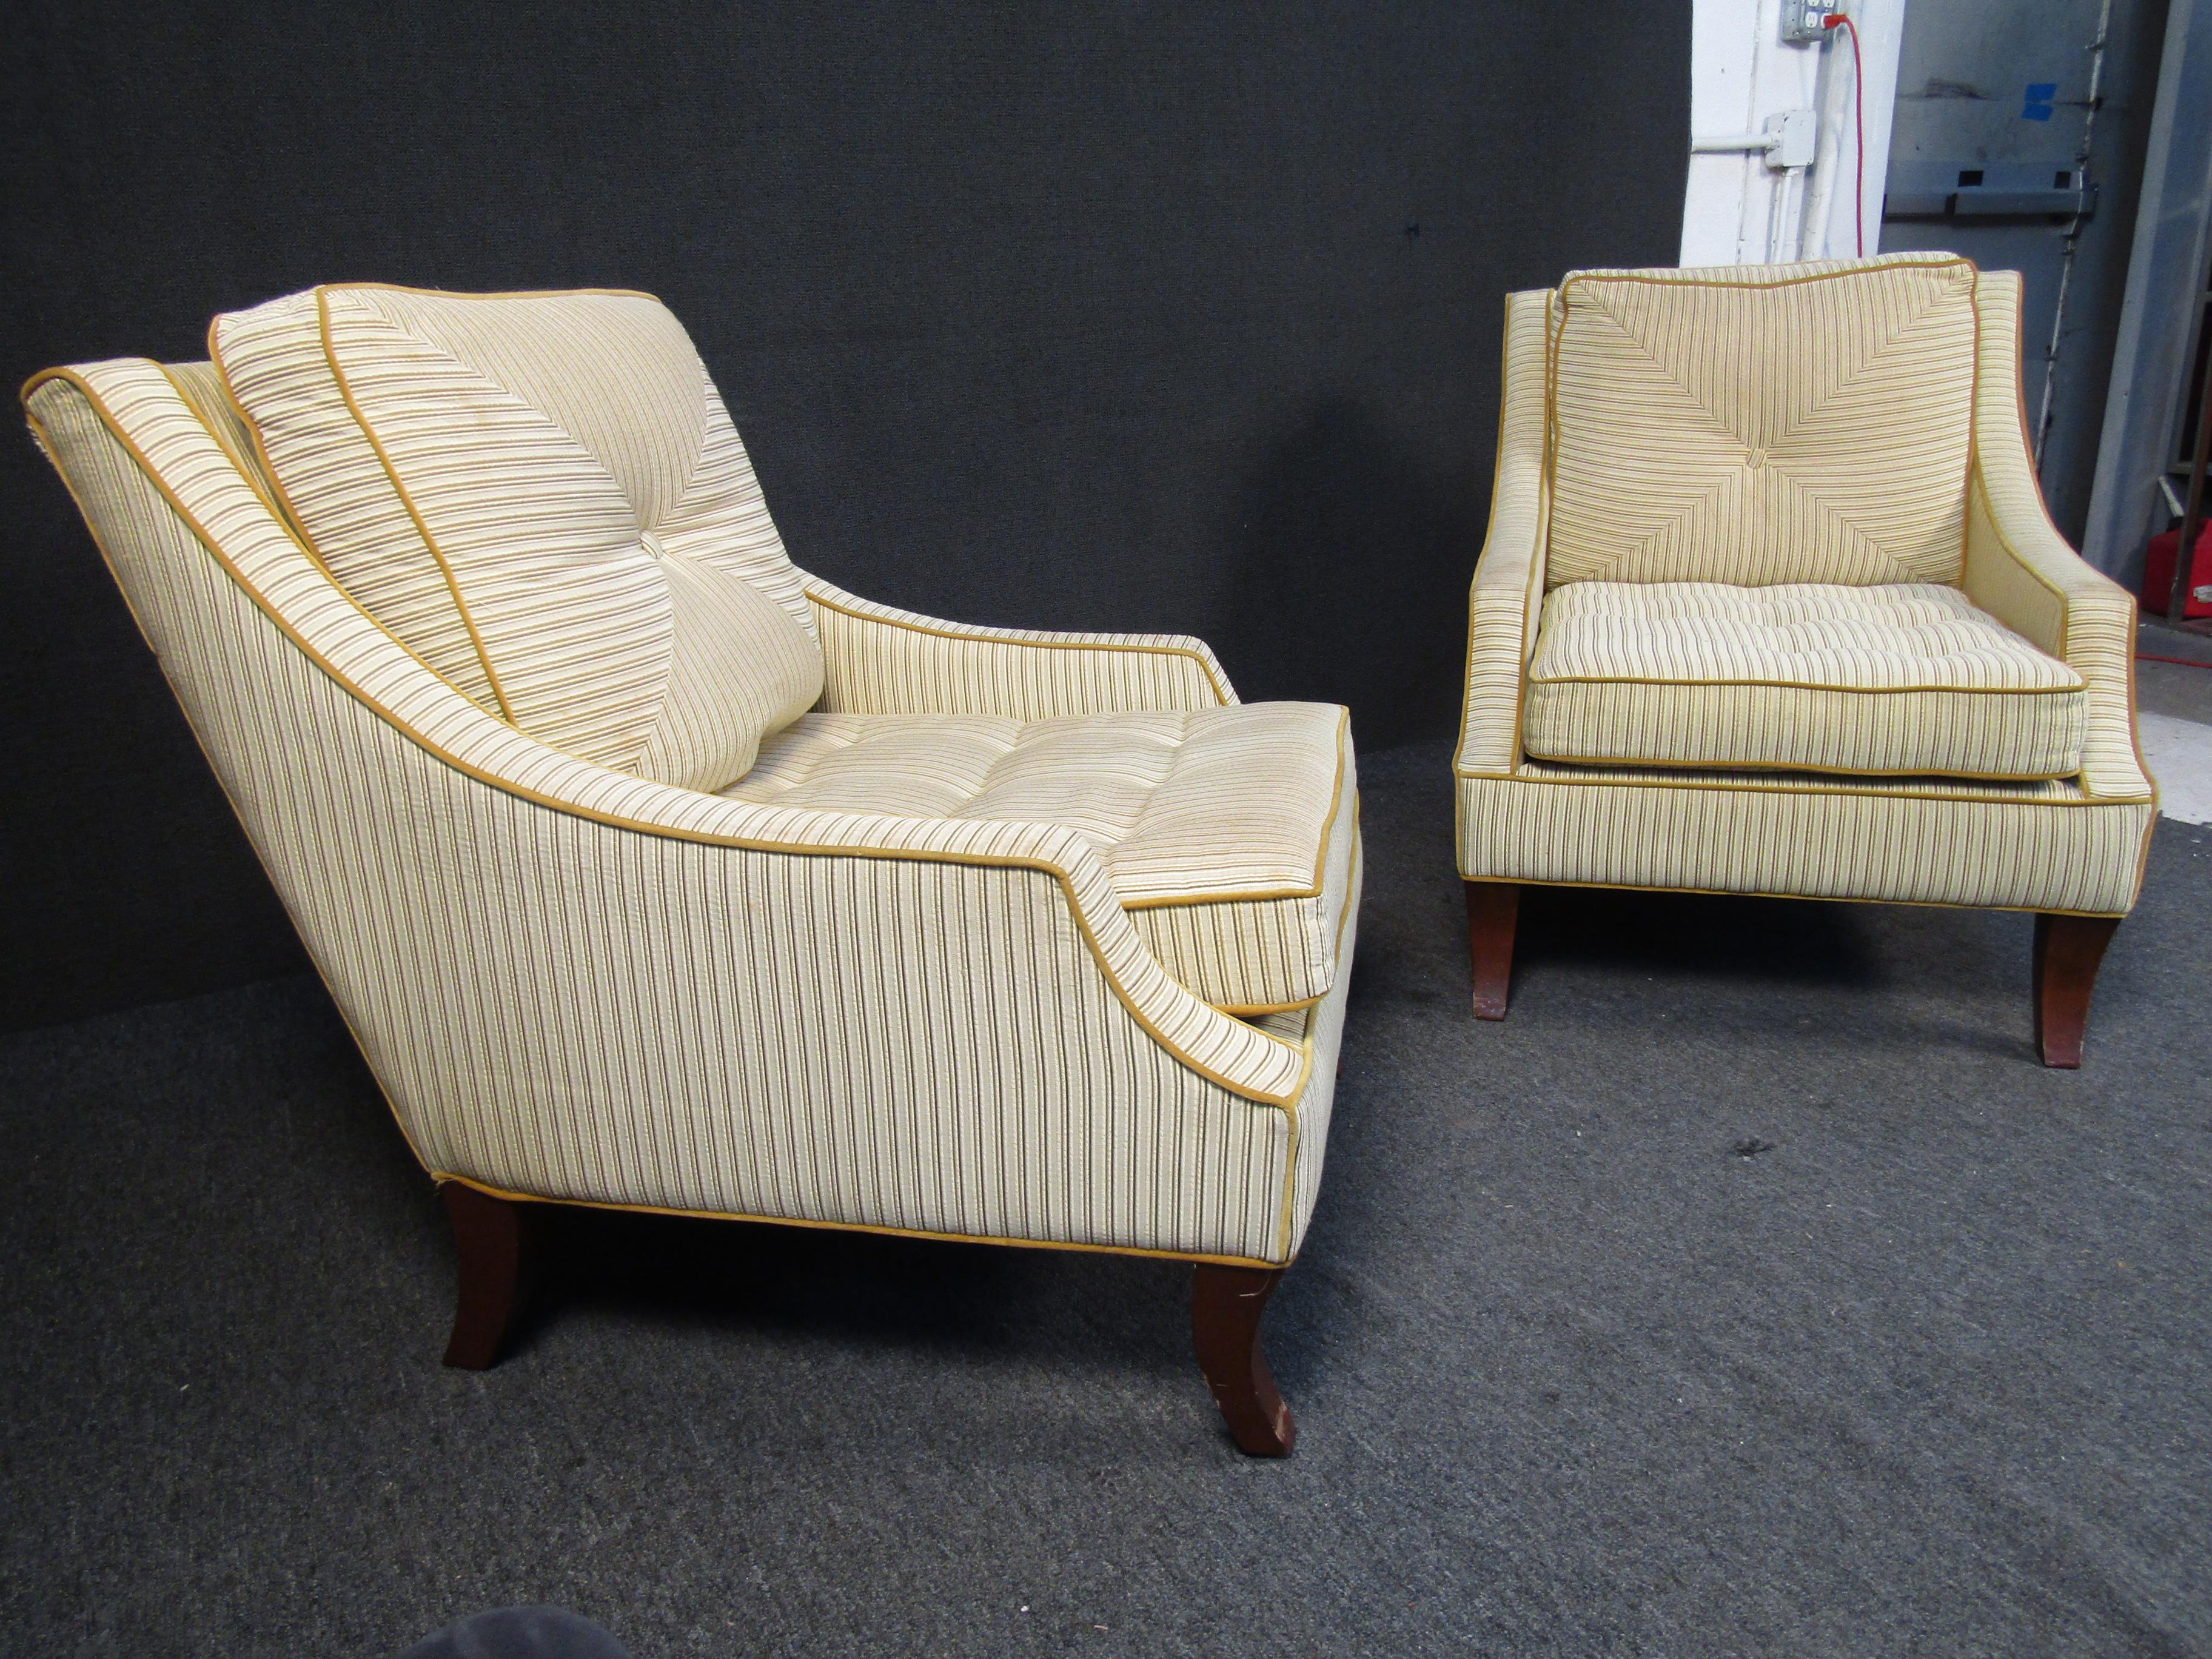 Mid-Century Tufted Lounge Chairs im Zustand „Gut“ im Angebot in Brooklyn, NY